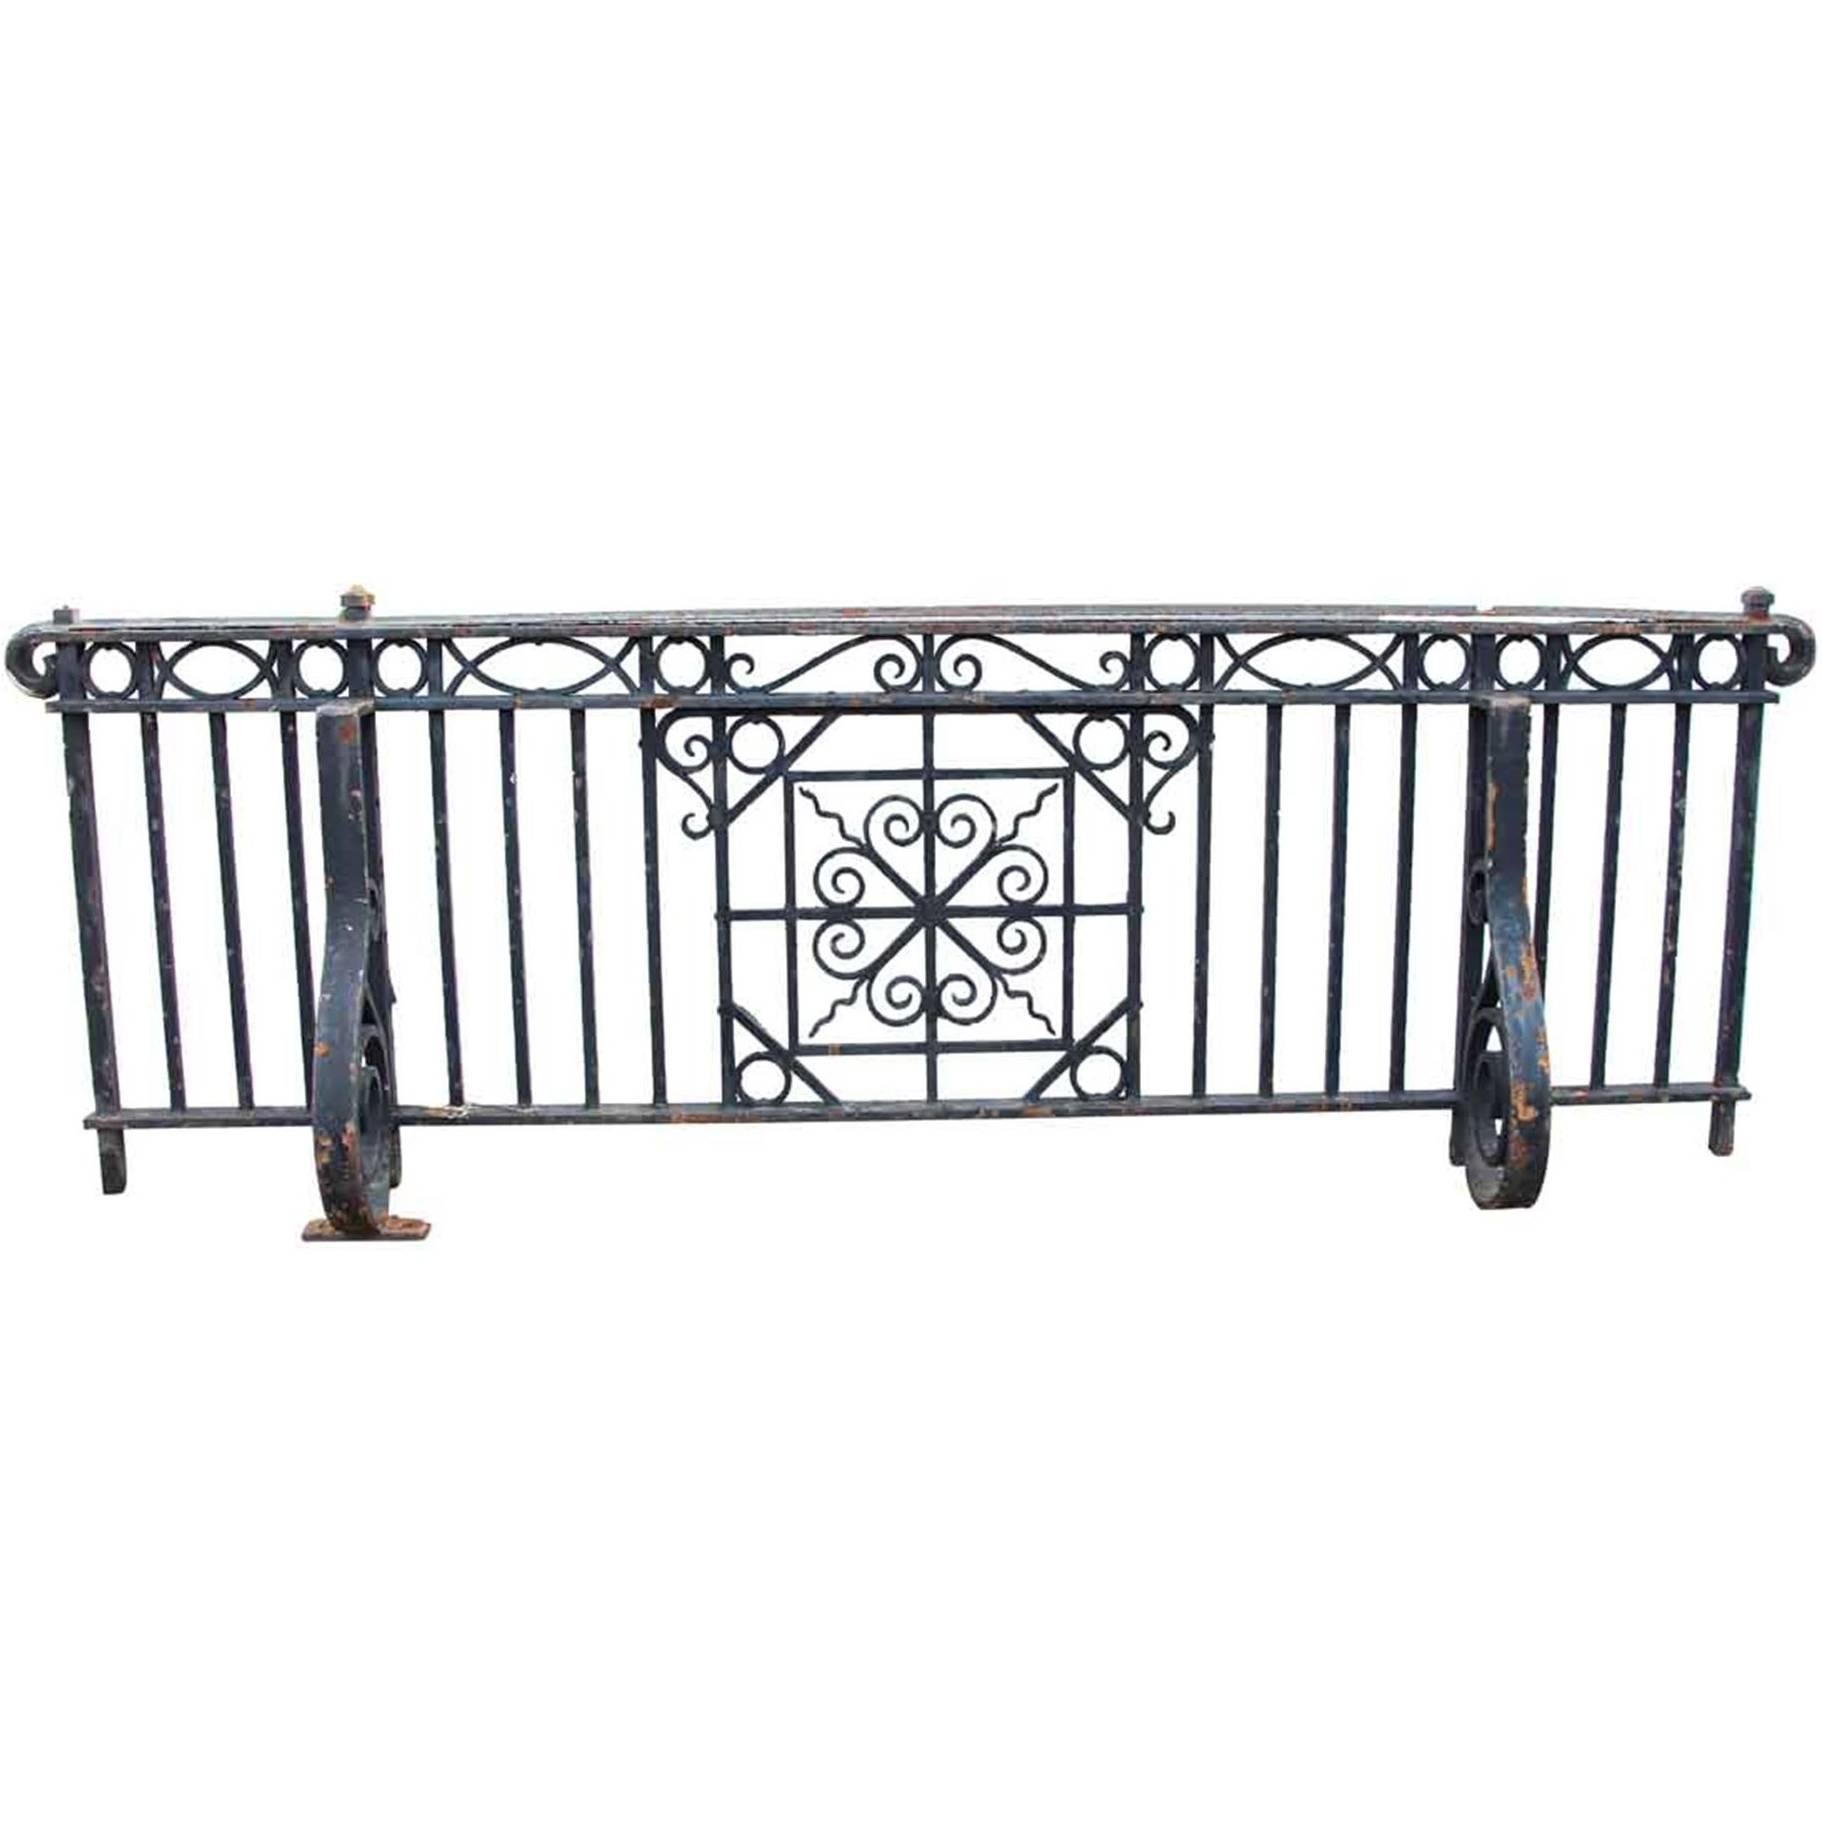 1905 Hand-Wrought Iron Juliet Balcony with Ornate Mounting Brackets